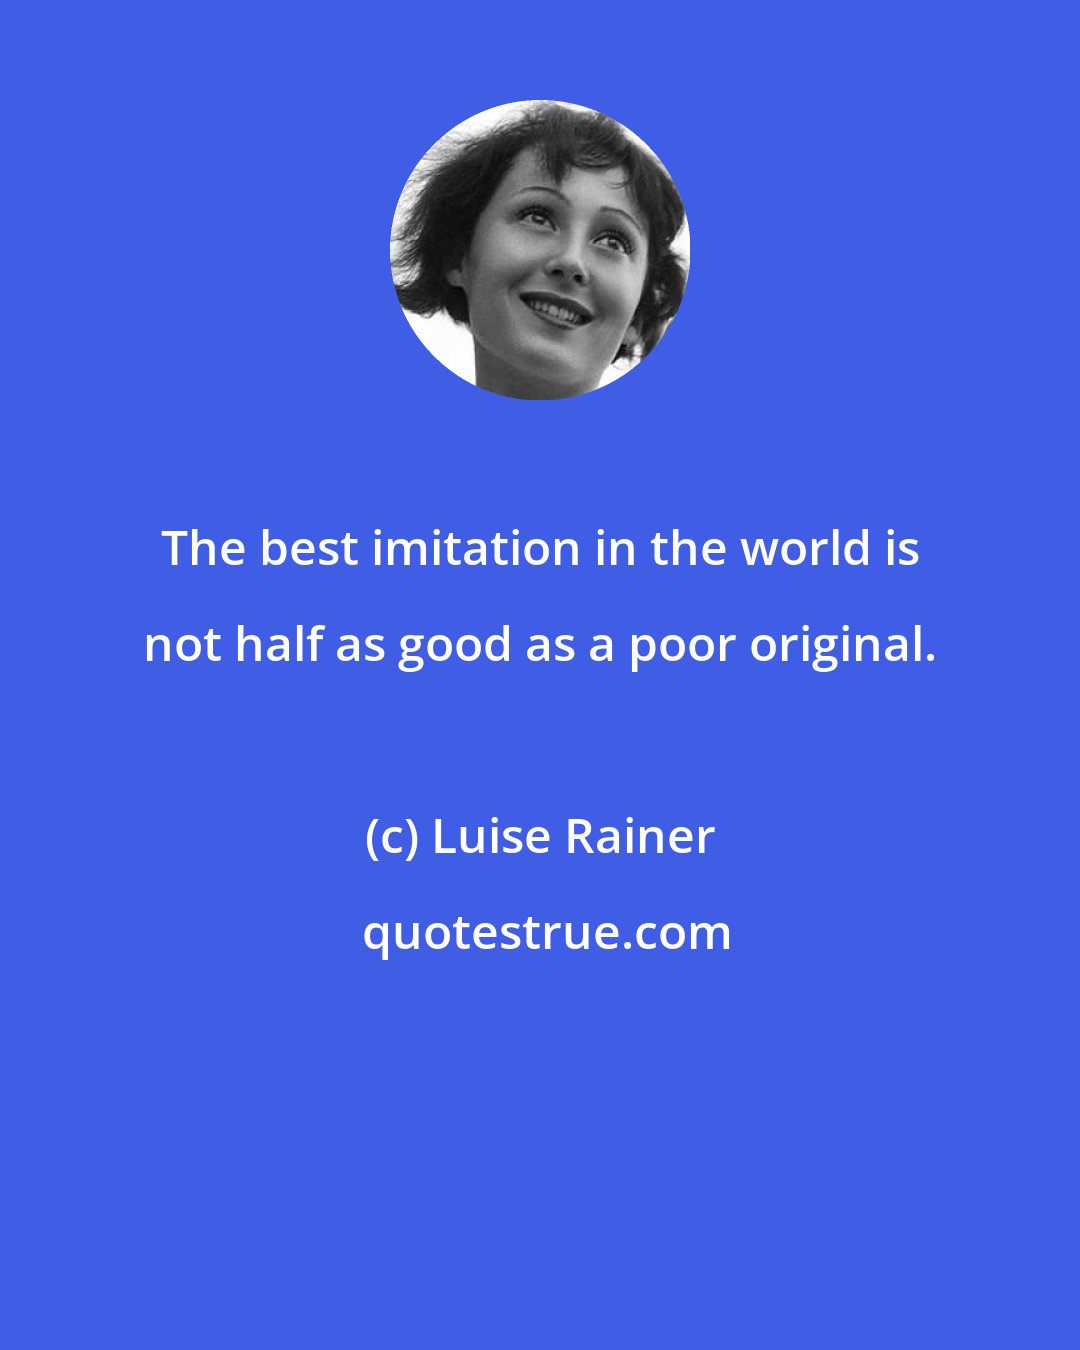 Luise Rainer: The best imitation in the world is not half as good as a poor original.